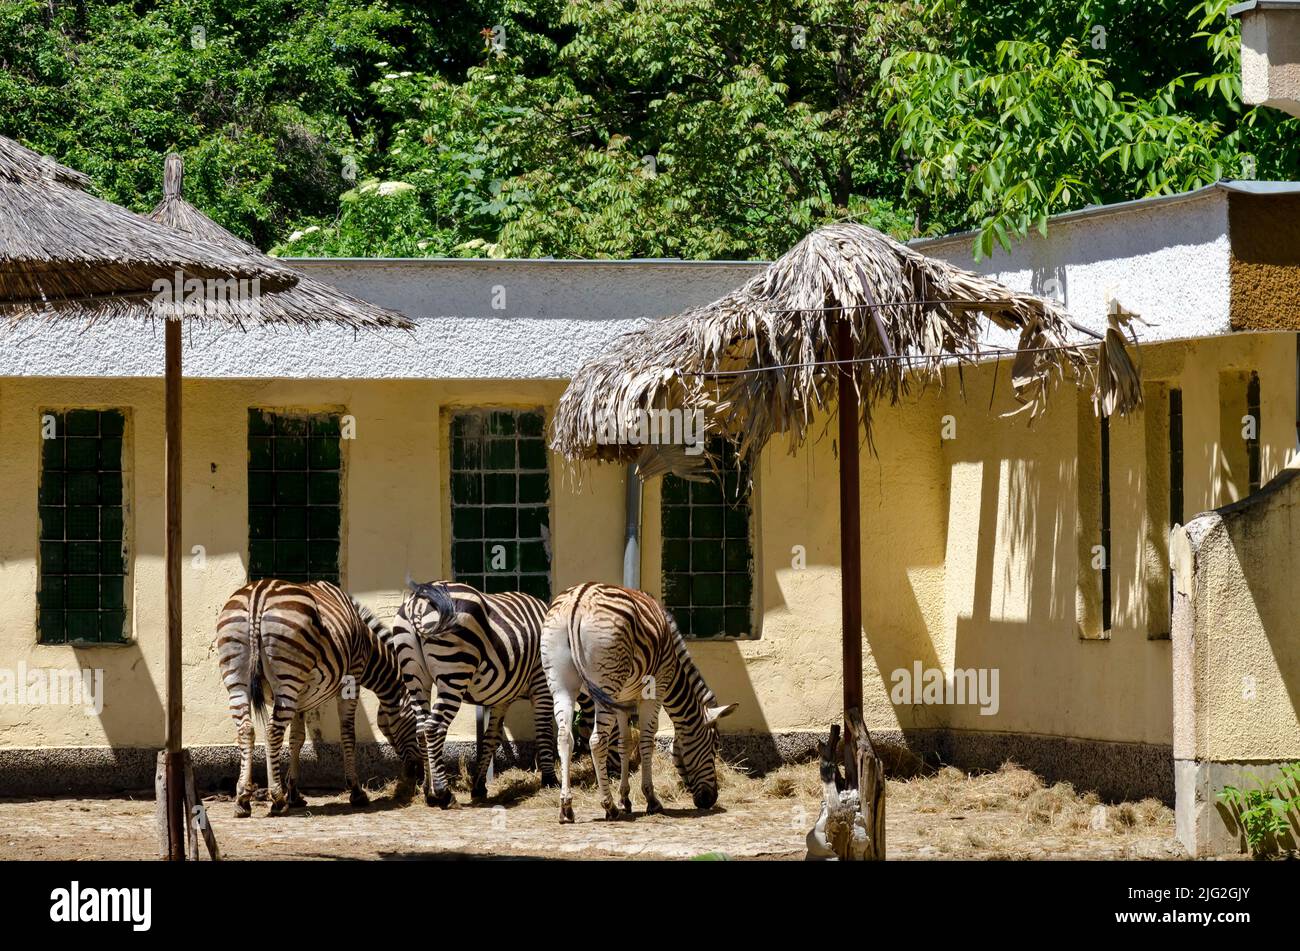 Several zebras feed on hay from an outdoor manger in the yard, Sofia, Bulgaria Stock Photo